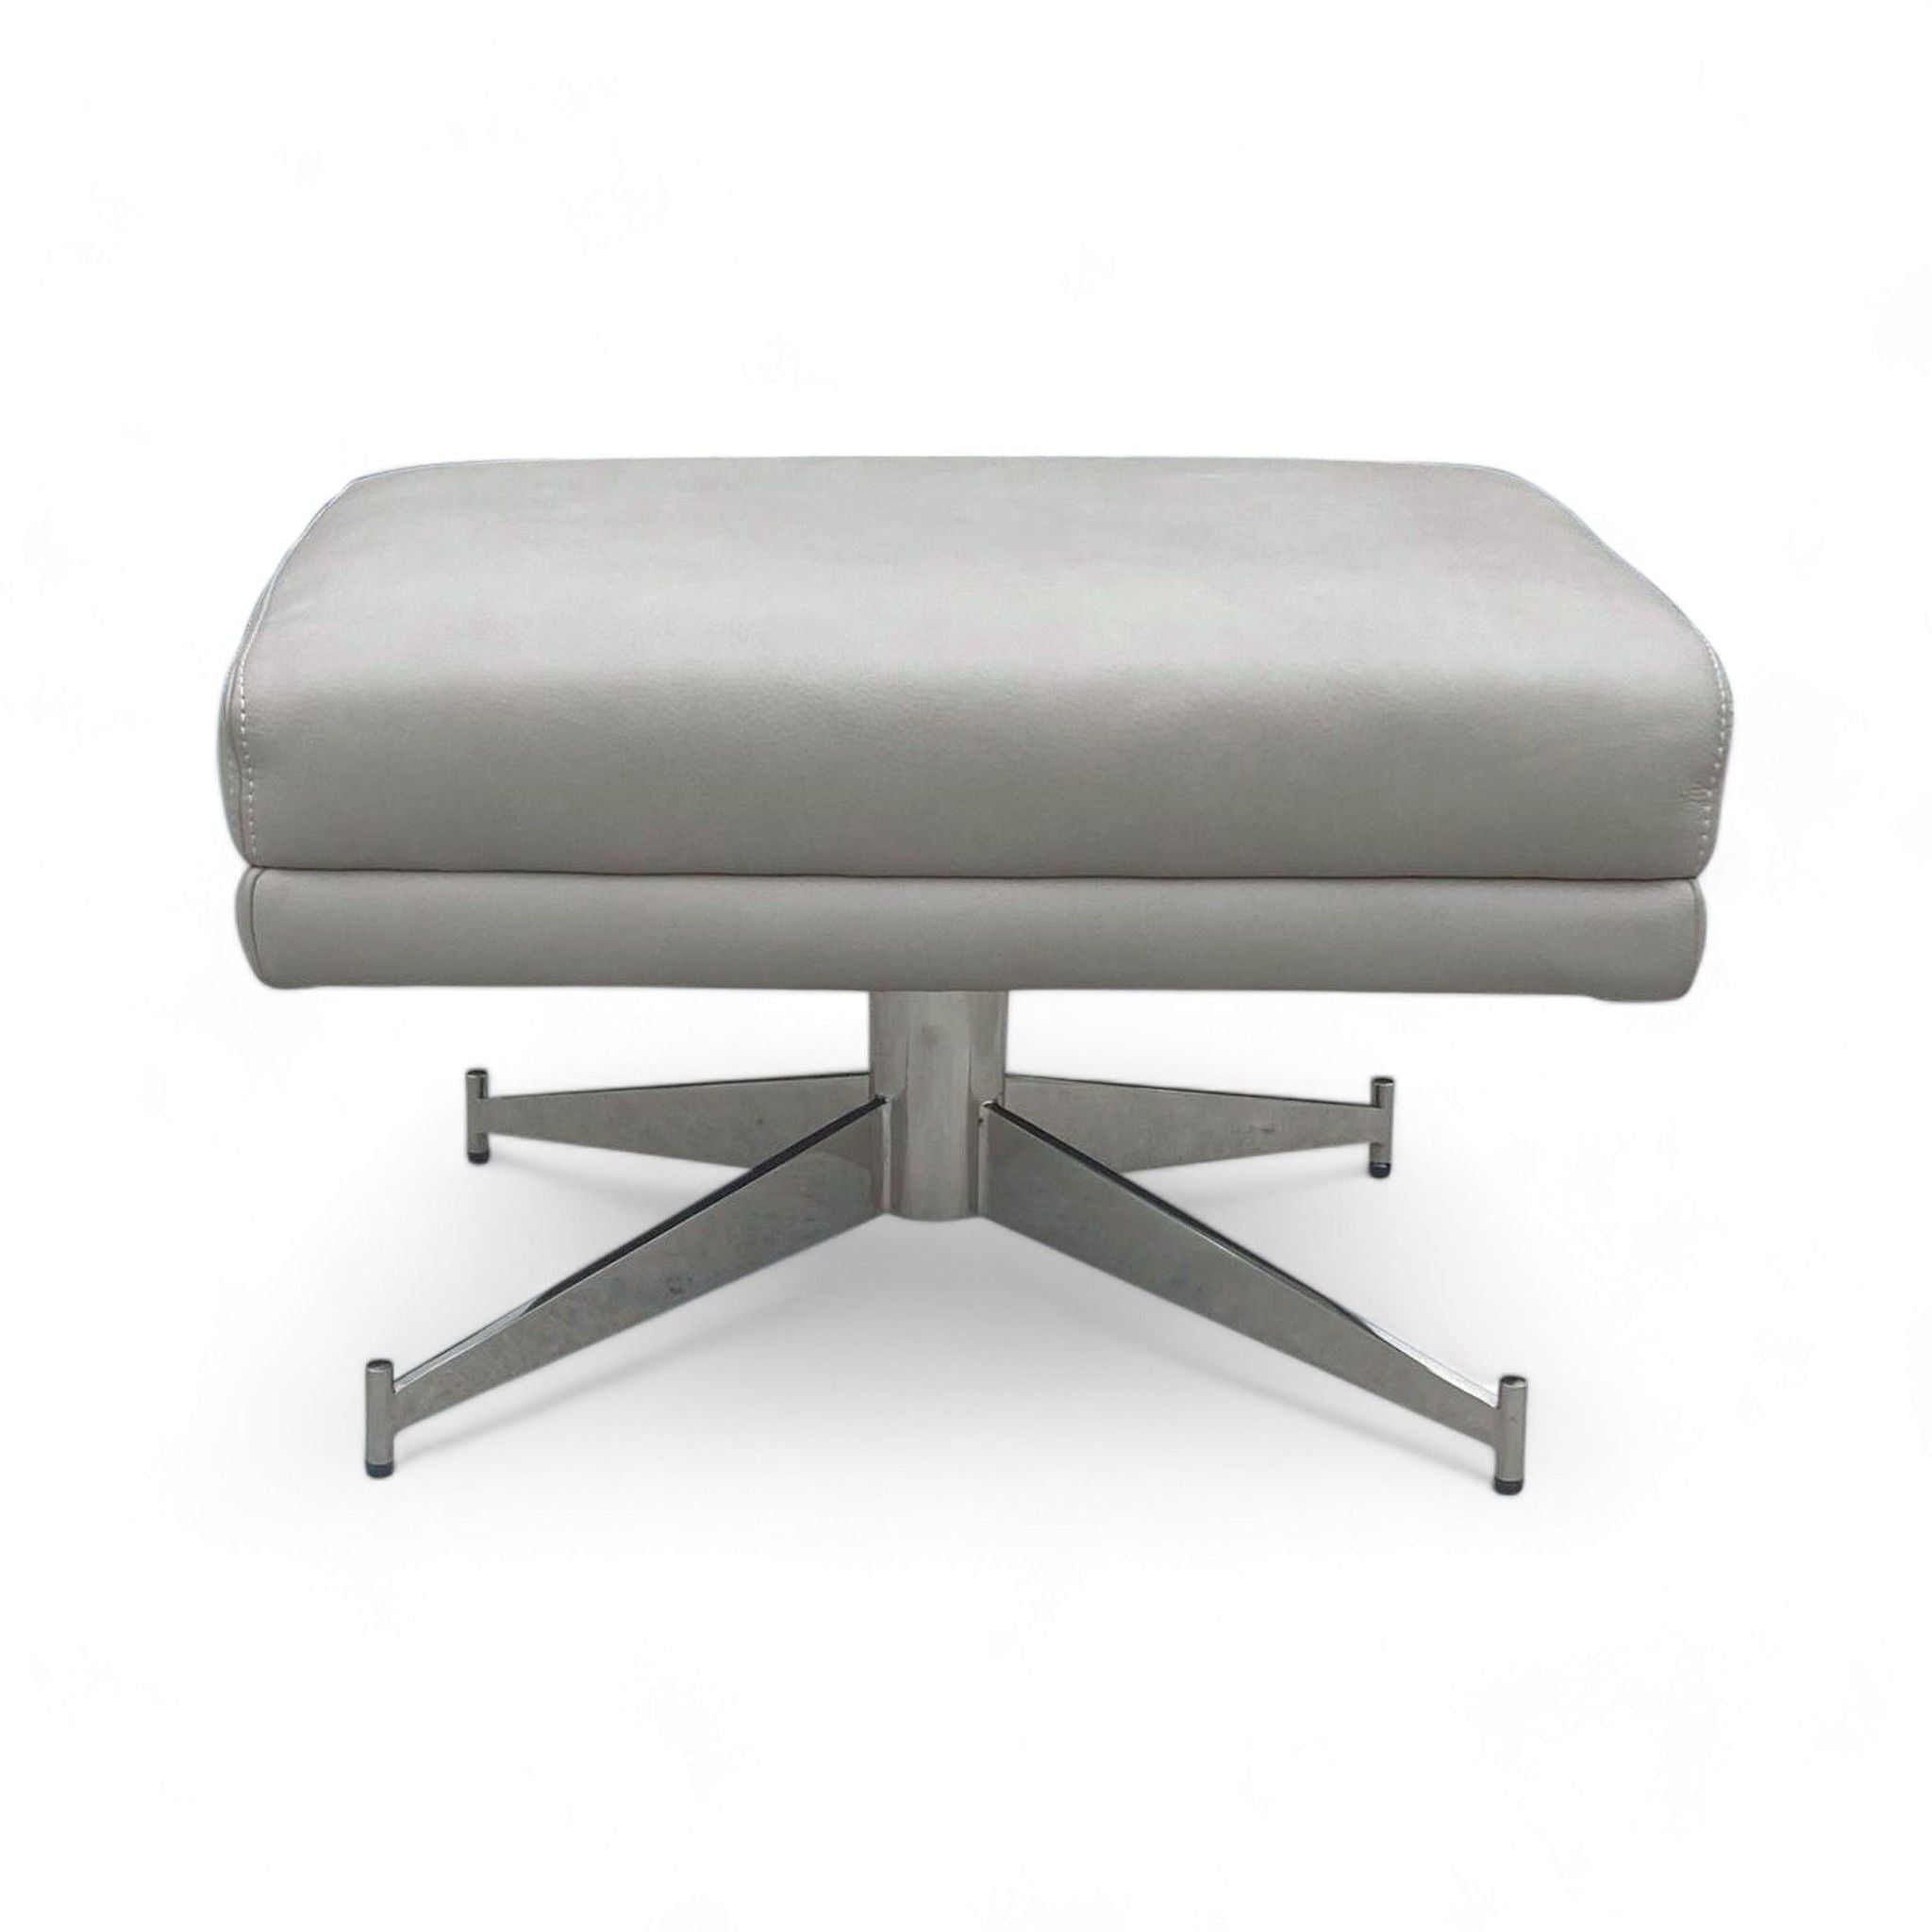 3. Side view of a West Elm Austin Ottoman highlighting the cushioned top and sturdy chrome X-base design.